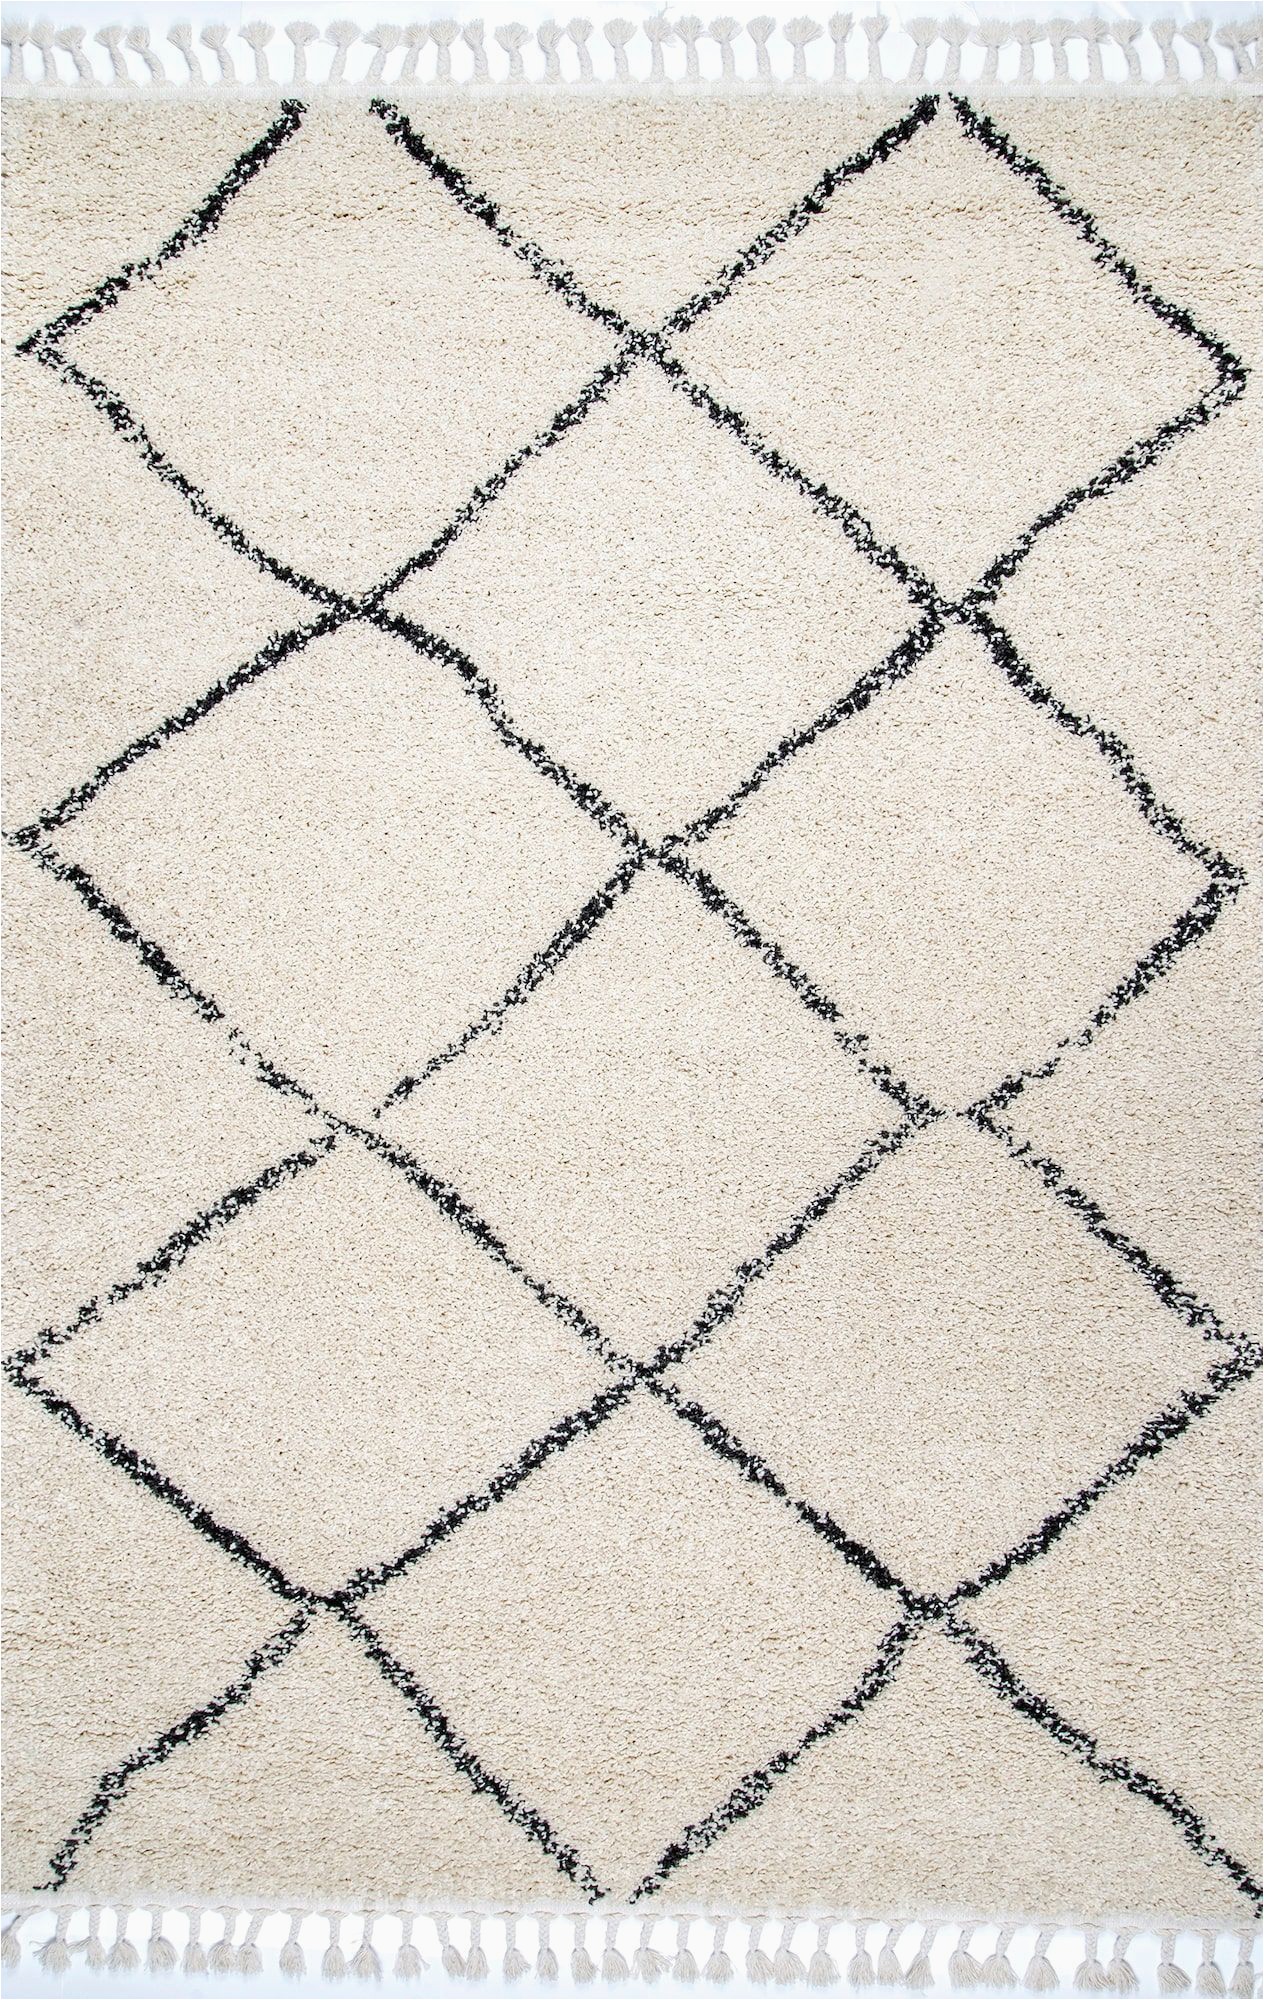 Off White 8×10 area Rugs Rugs Usa area Rugs In Many Styles Including Contemporary